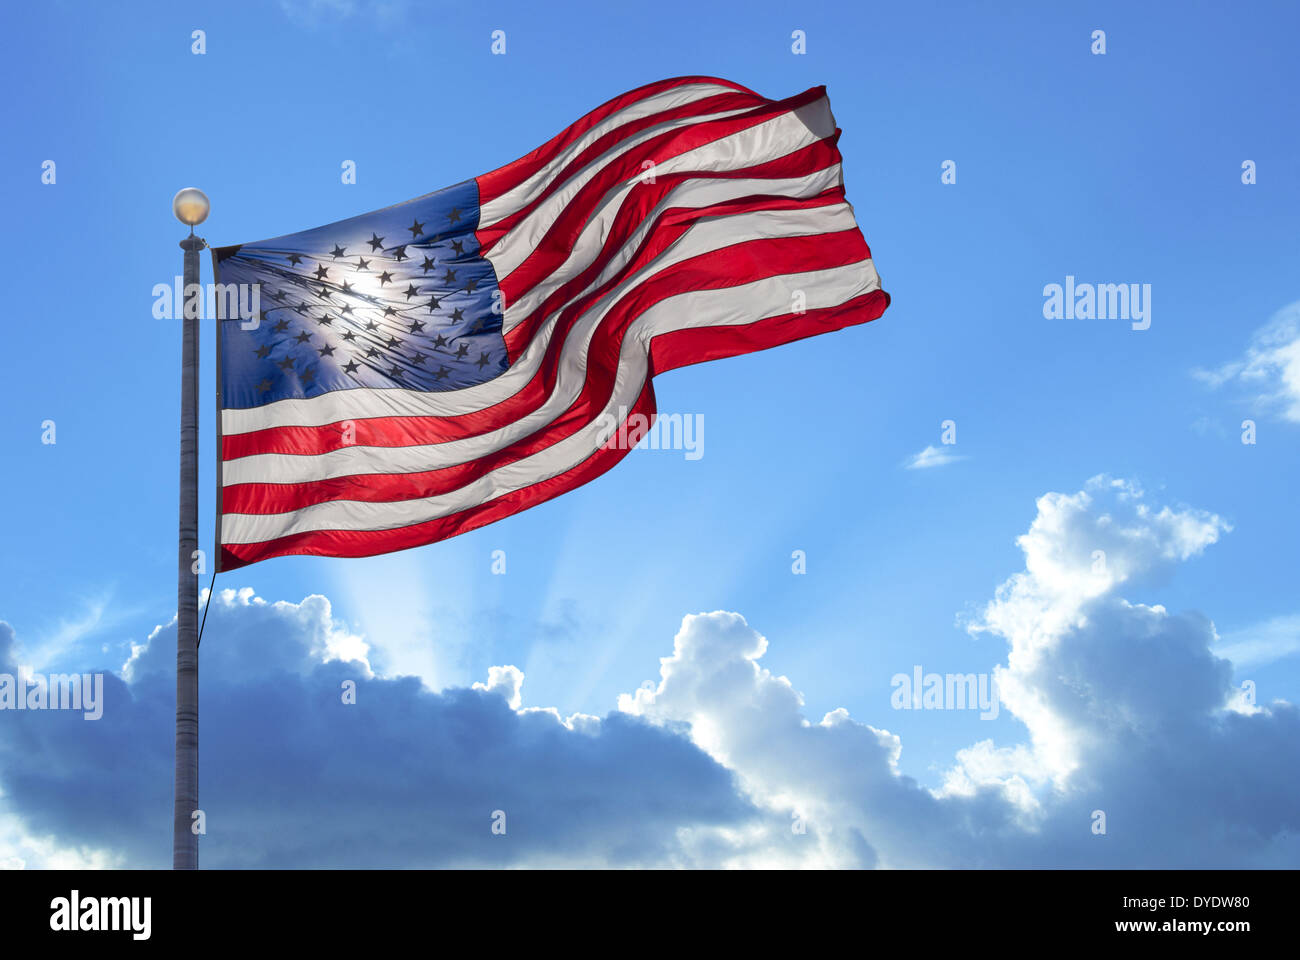 American flag waving in the wind Stock Photo